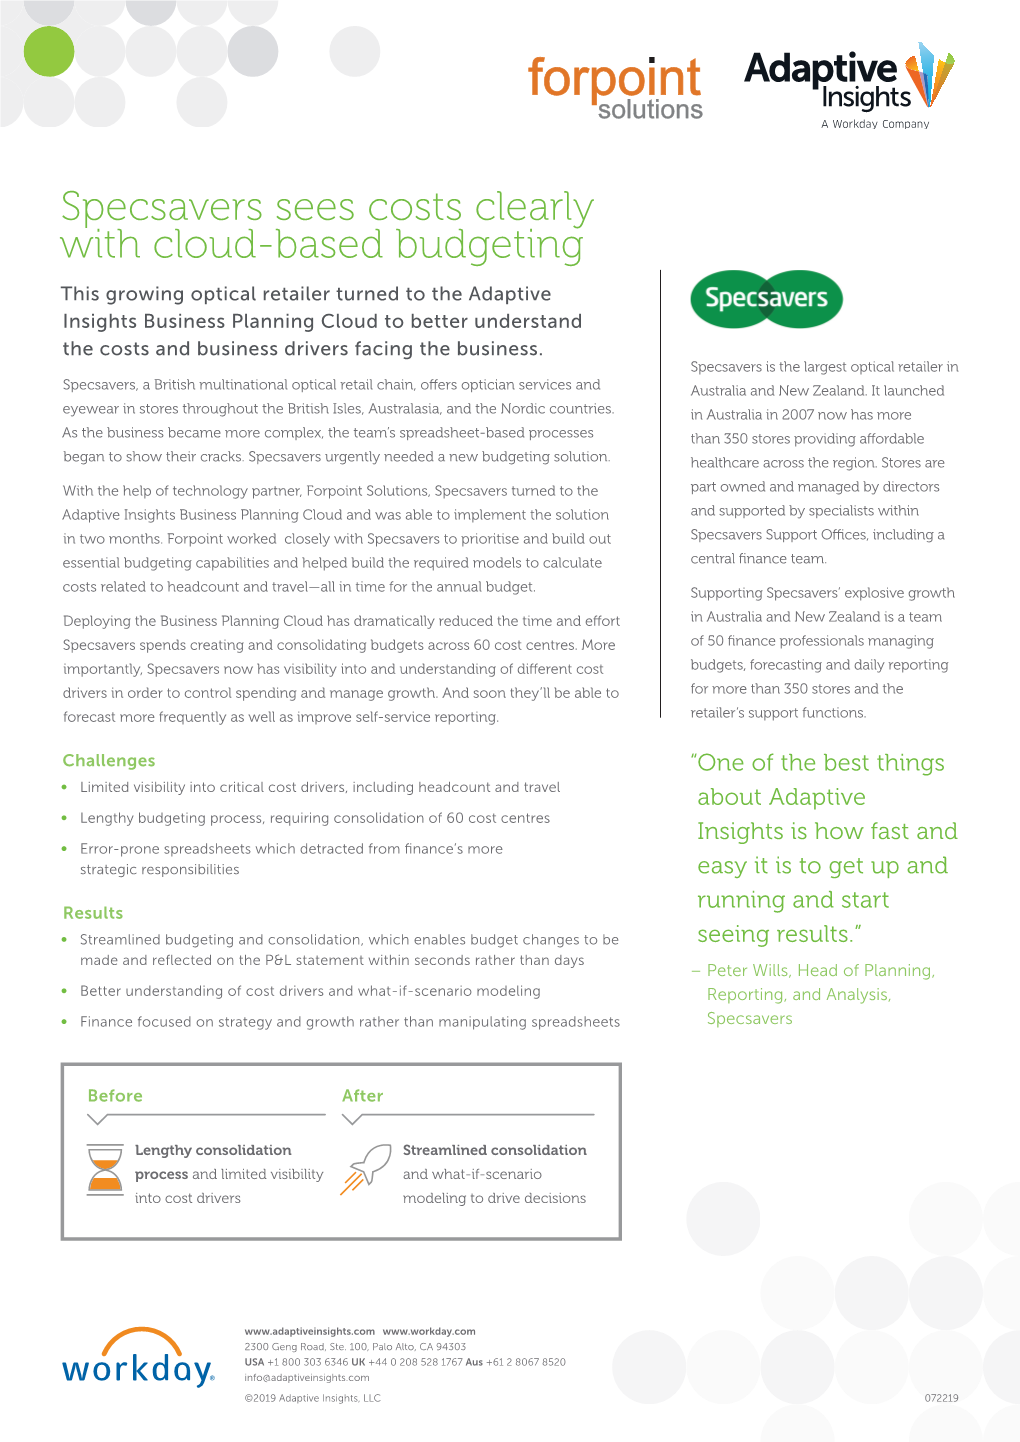 Specsavers Sees Costs Clearly with Cloud-Based Budgeting